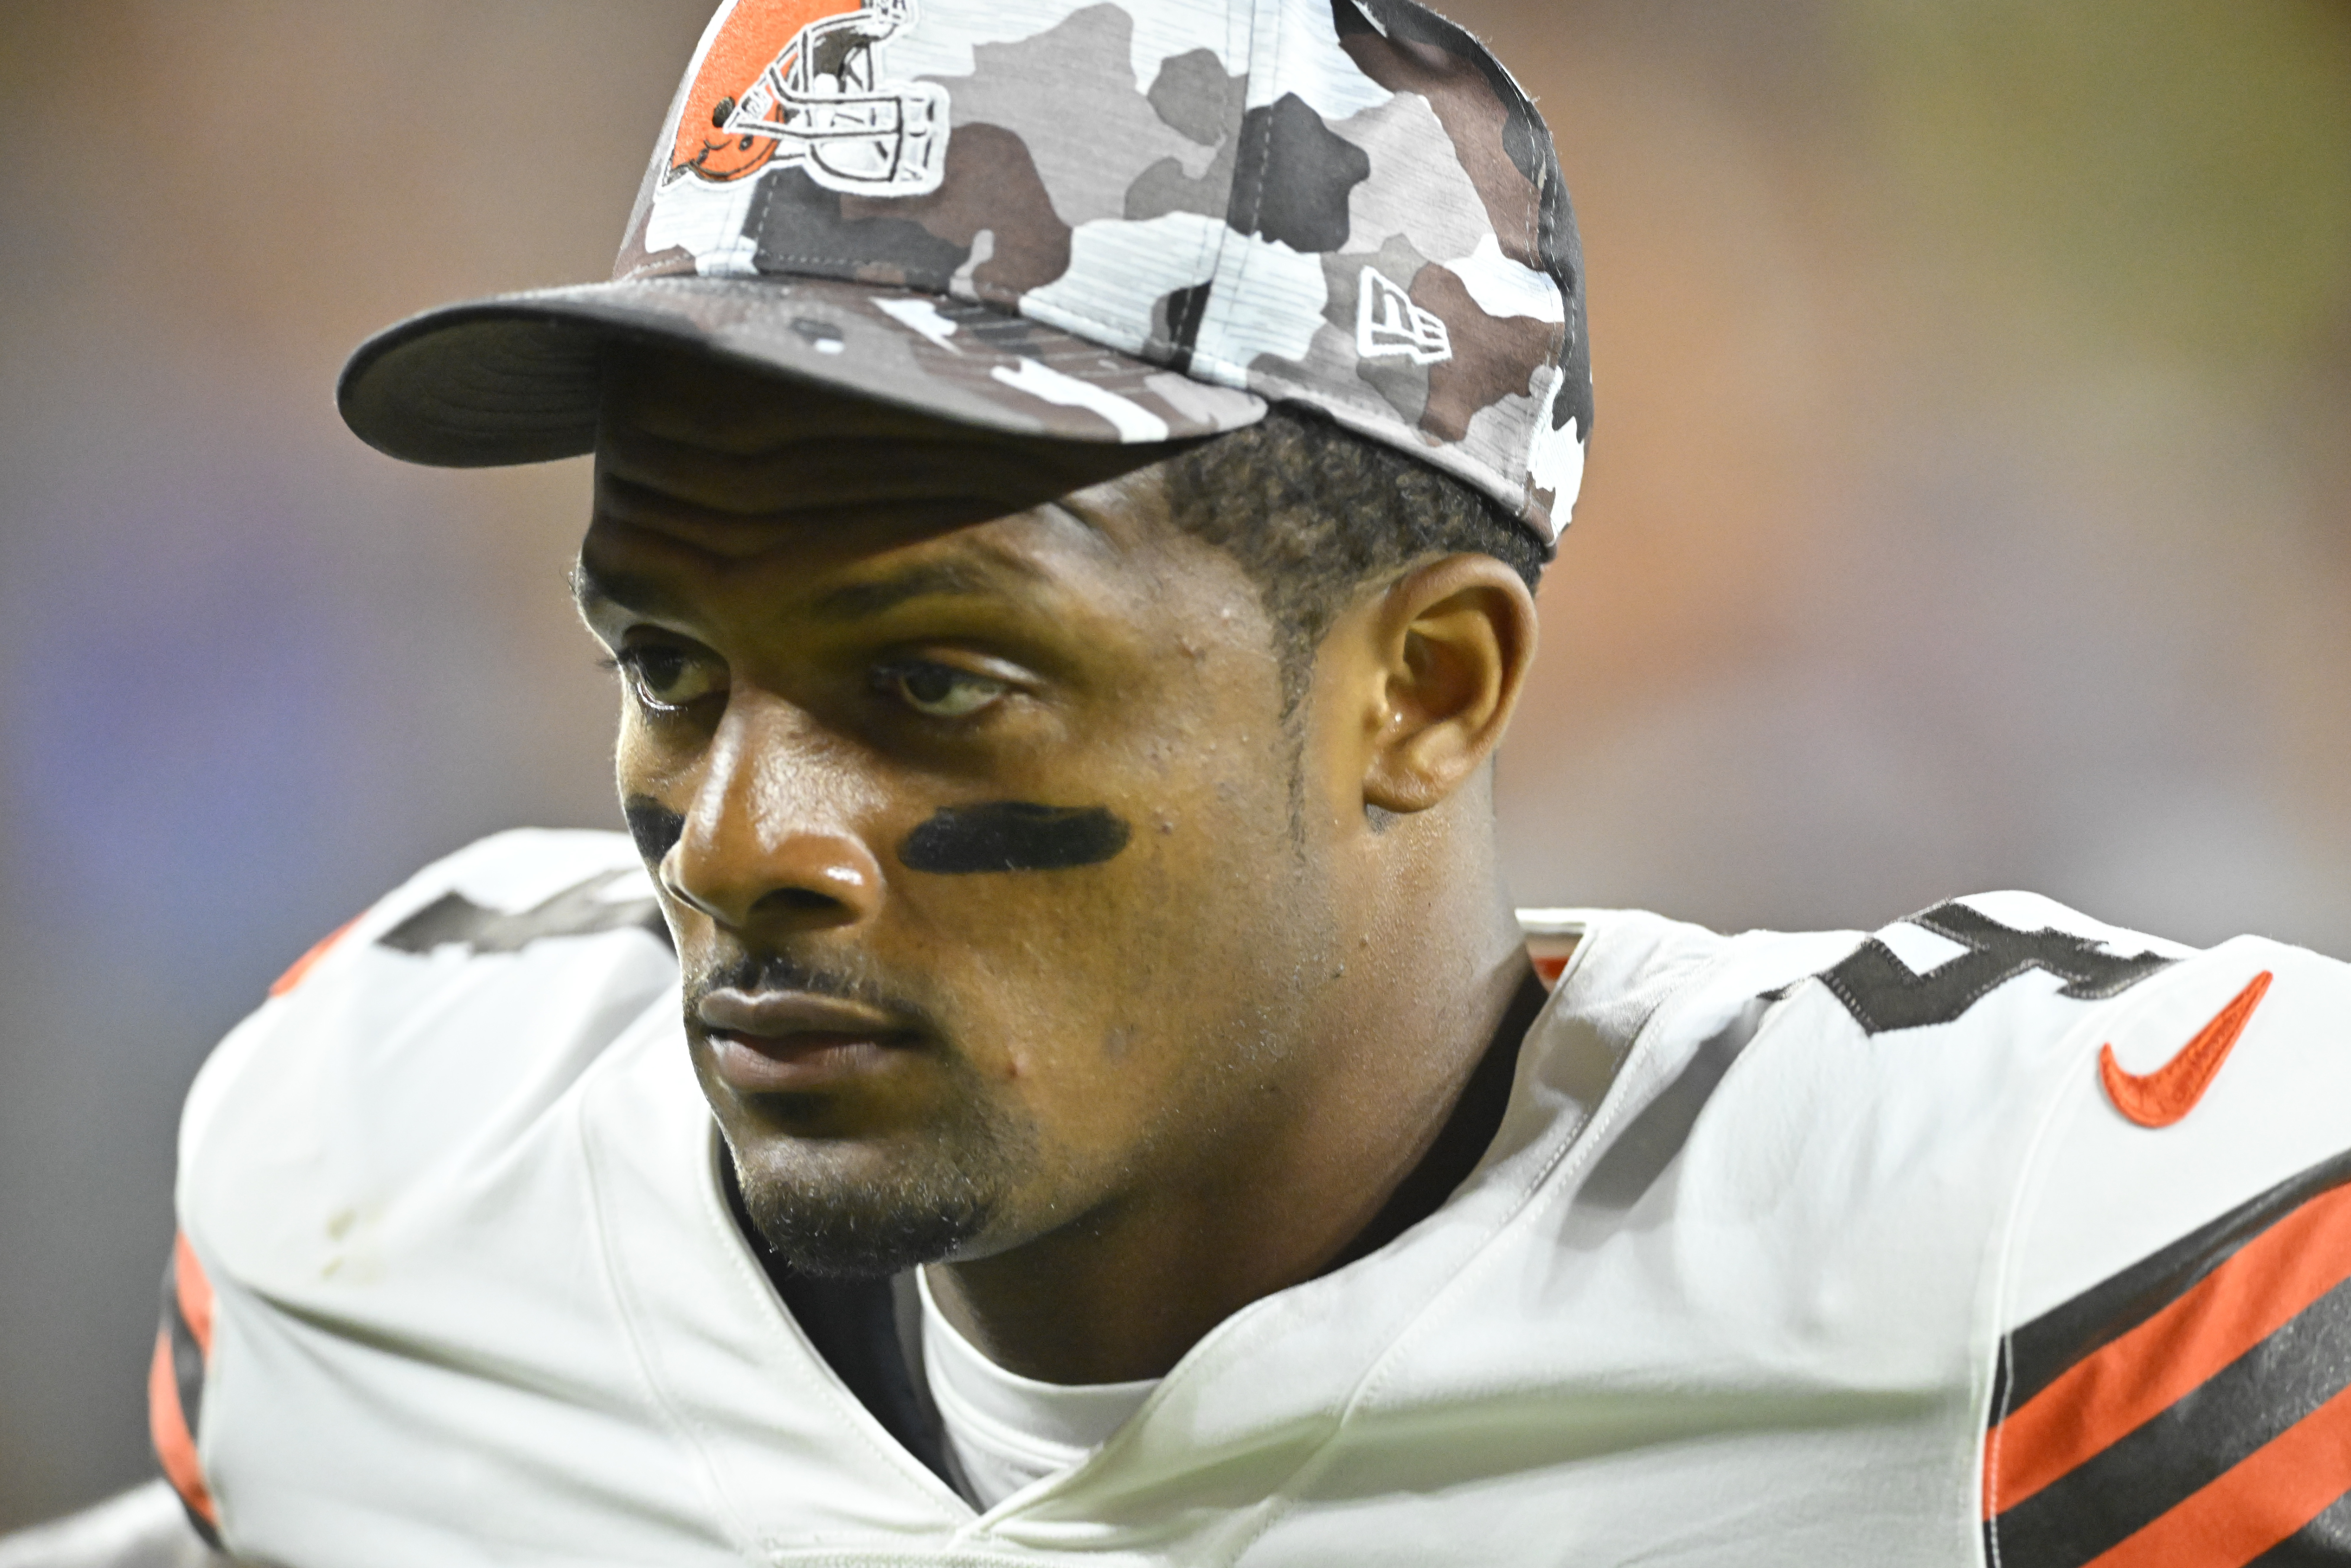 Browns 'excited' to have Deshaun Watson back, but focus remains on Texans